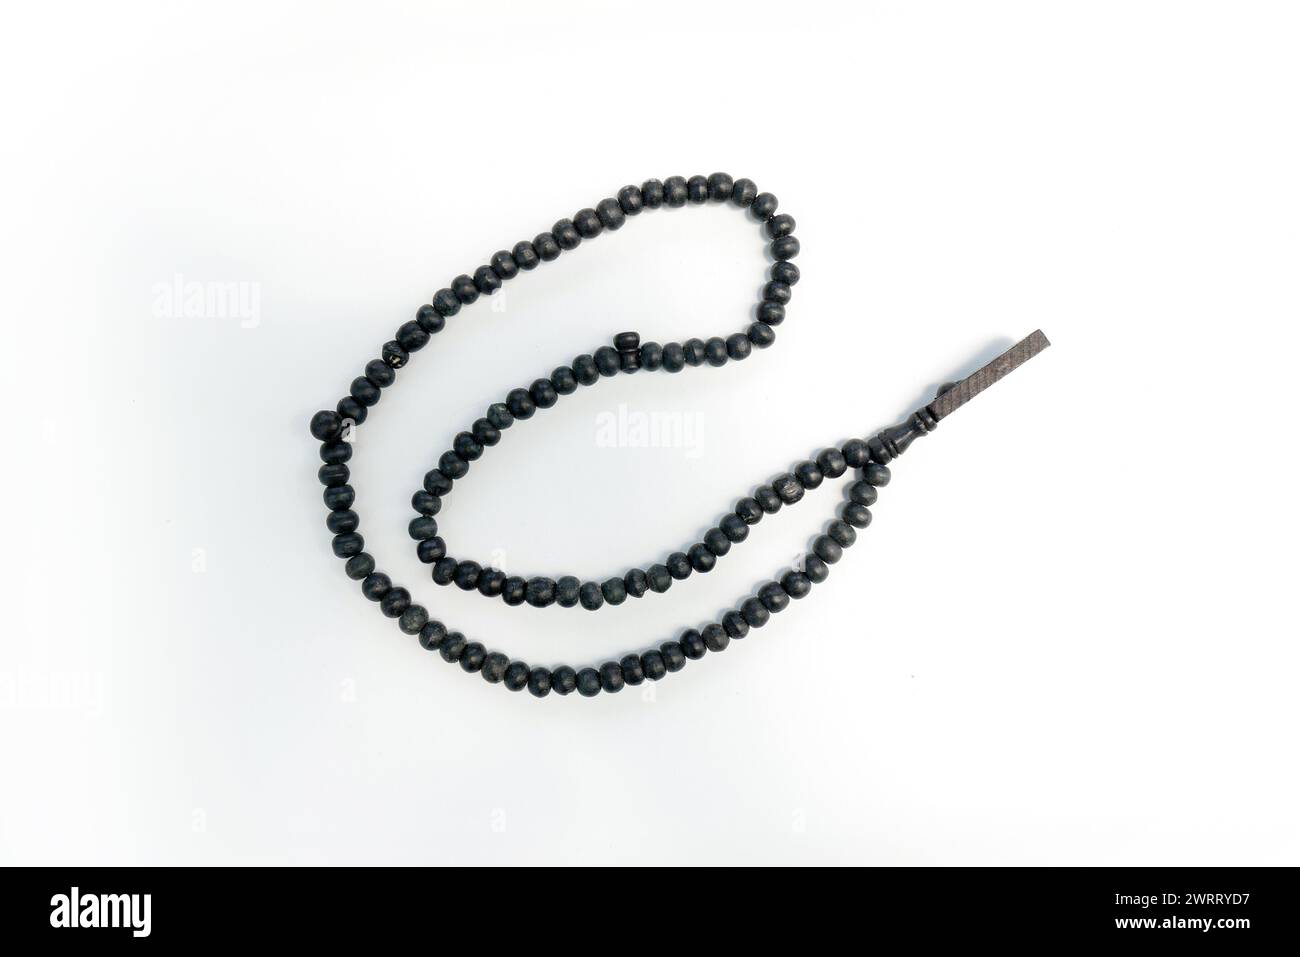 Black wooden prayer beads with 33 knots on a white background Stock Photo